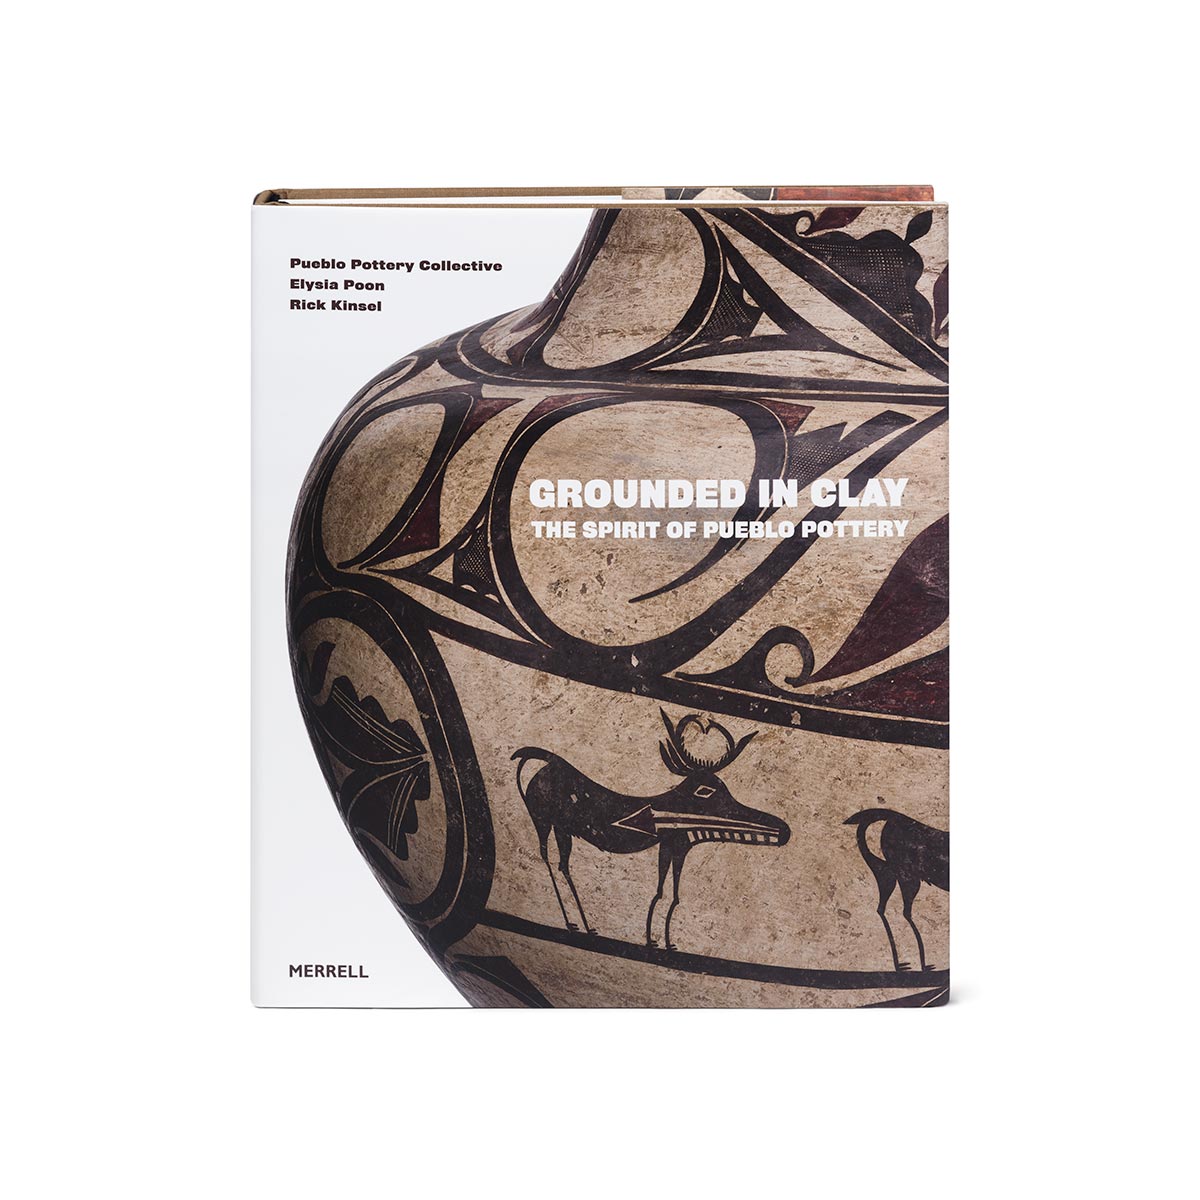 The book cover for Grounded in Clay, with a close-up of a Pueblo pot featuring deer.